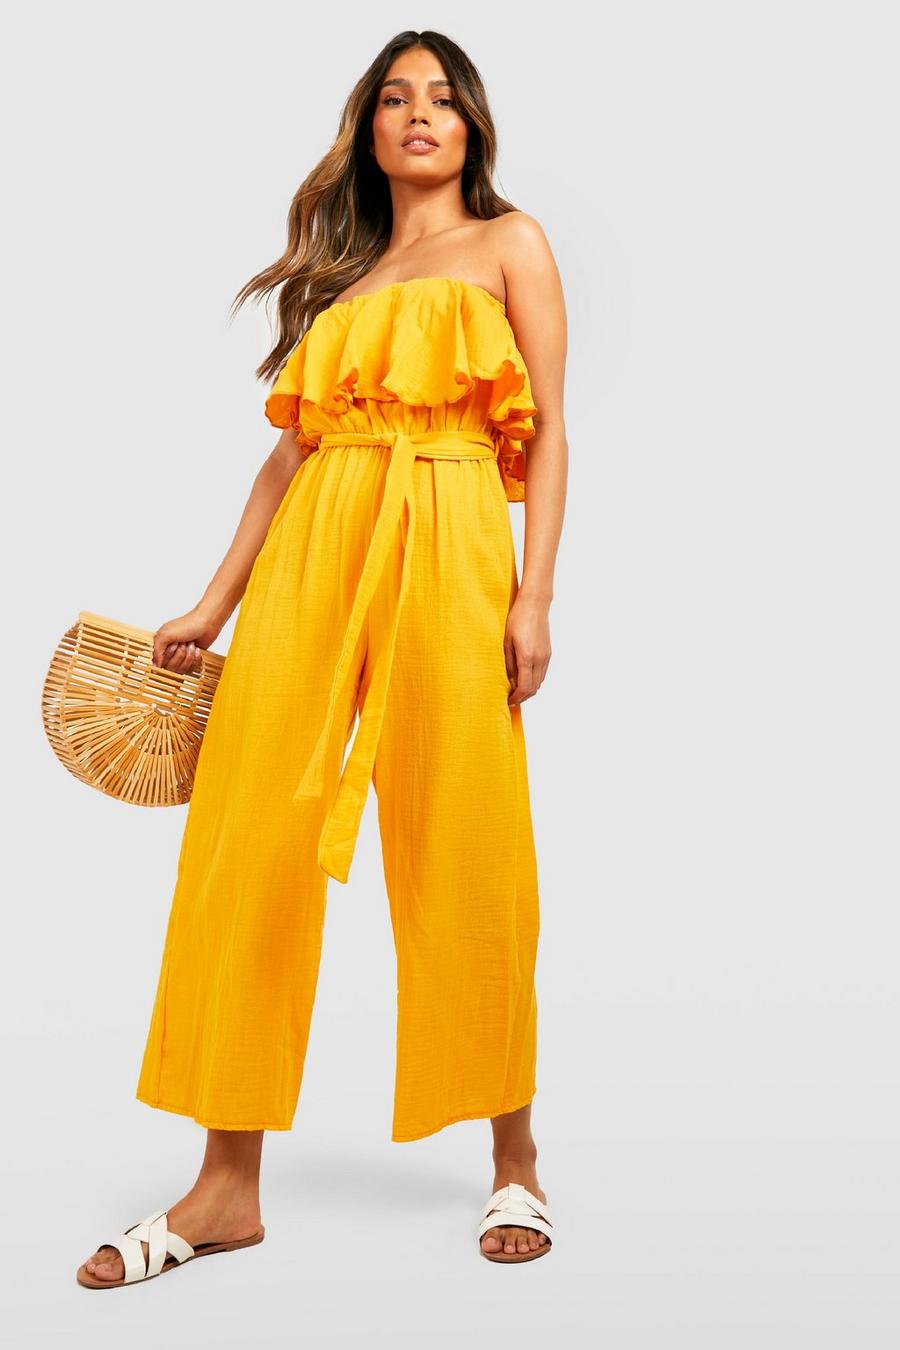 Mustard yellow Textured Cotton Off The Shoulder Culotte Jumpsuit